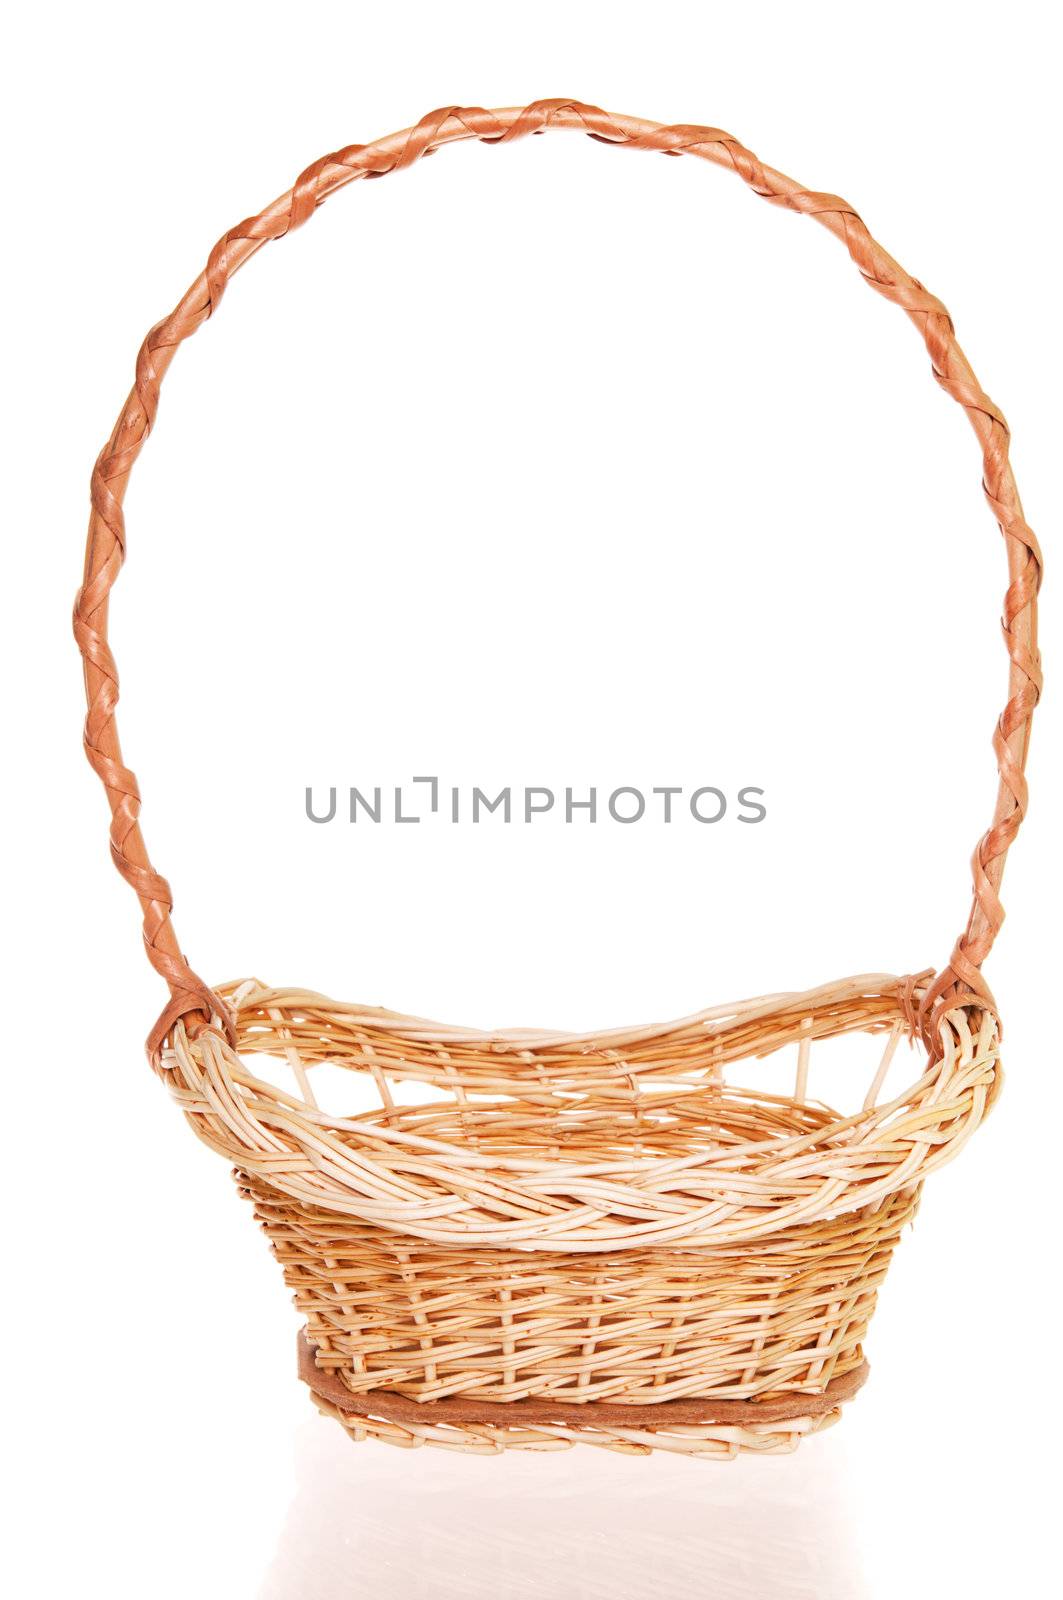 Empty wicker basket with reflection on white background